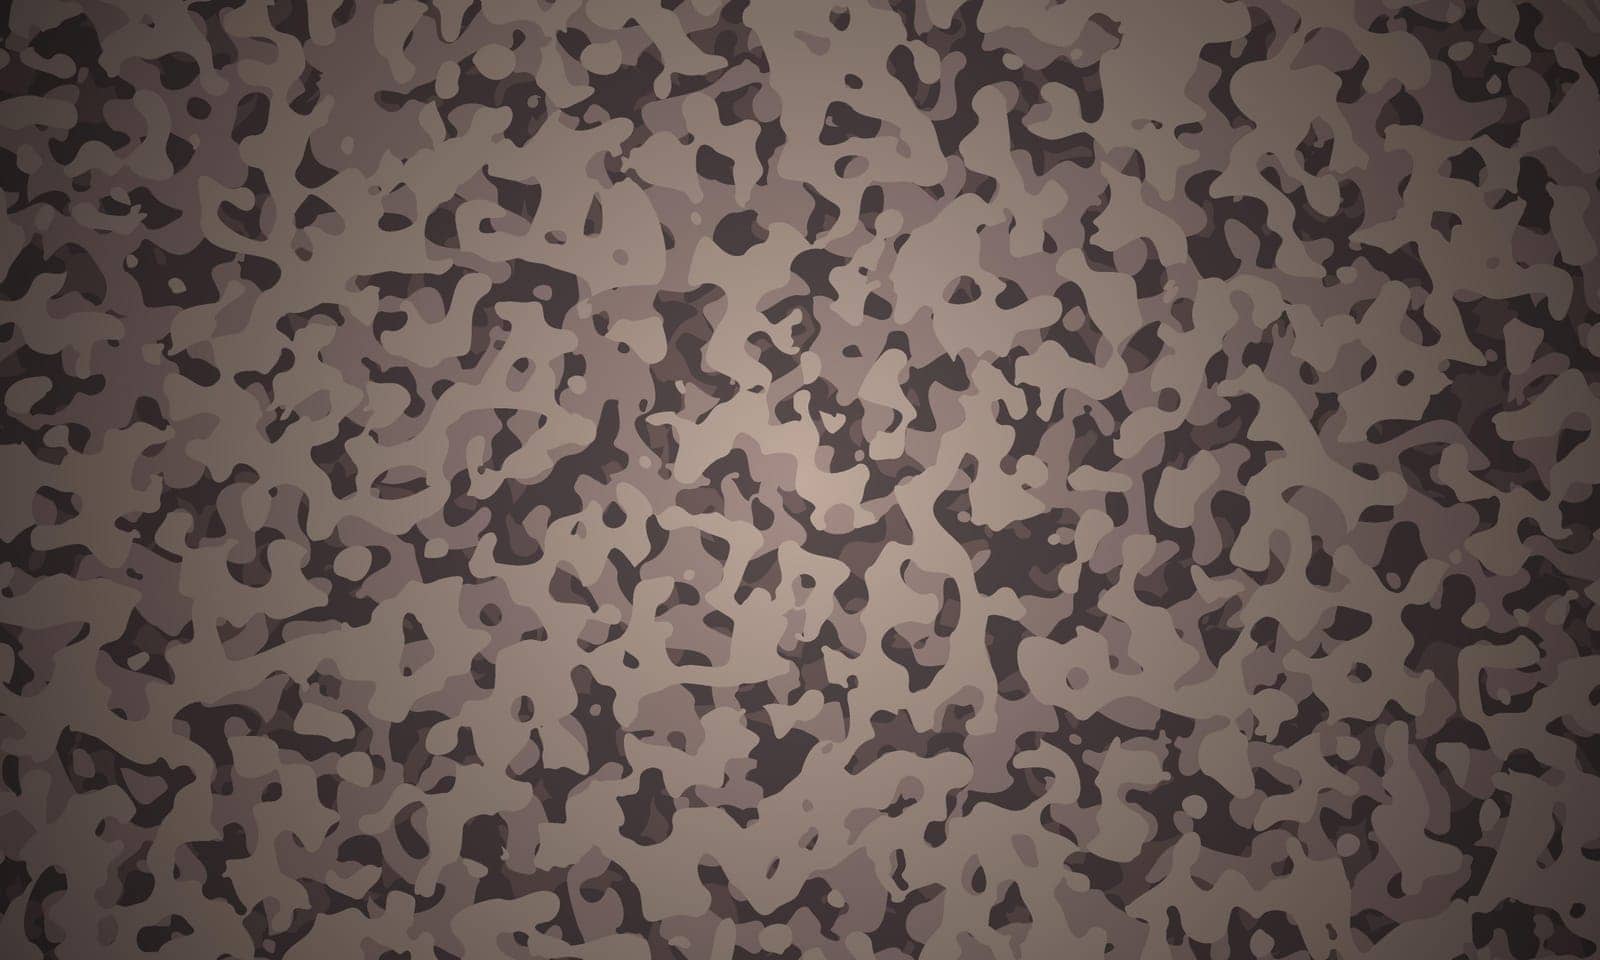 Camouflage background. Abstract military or hunting camouflage background. Vector illustration